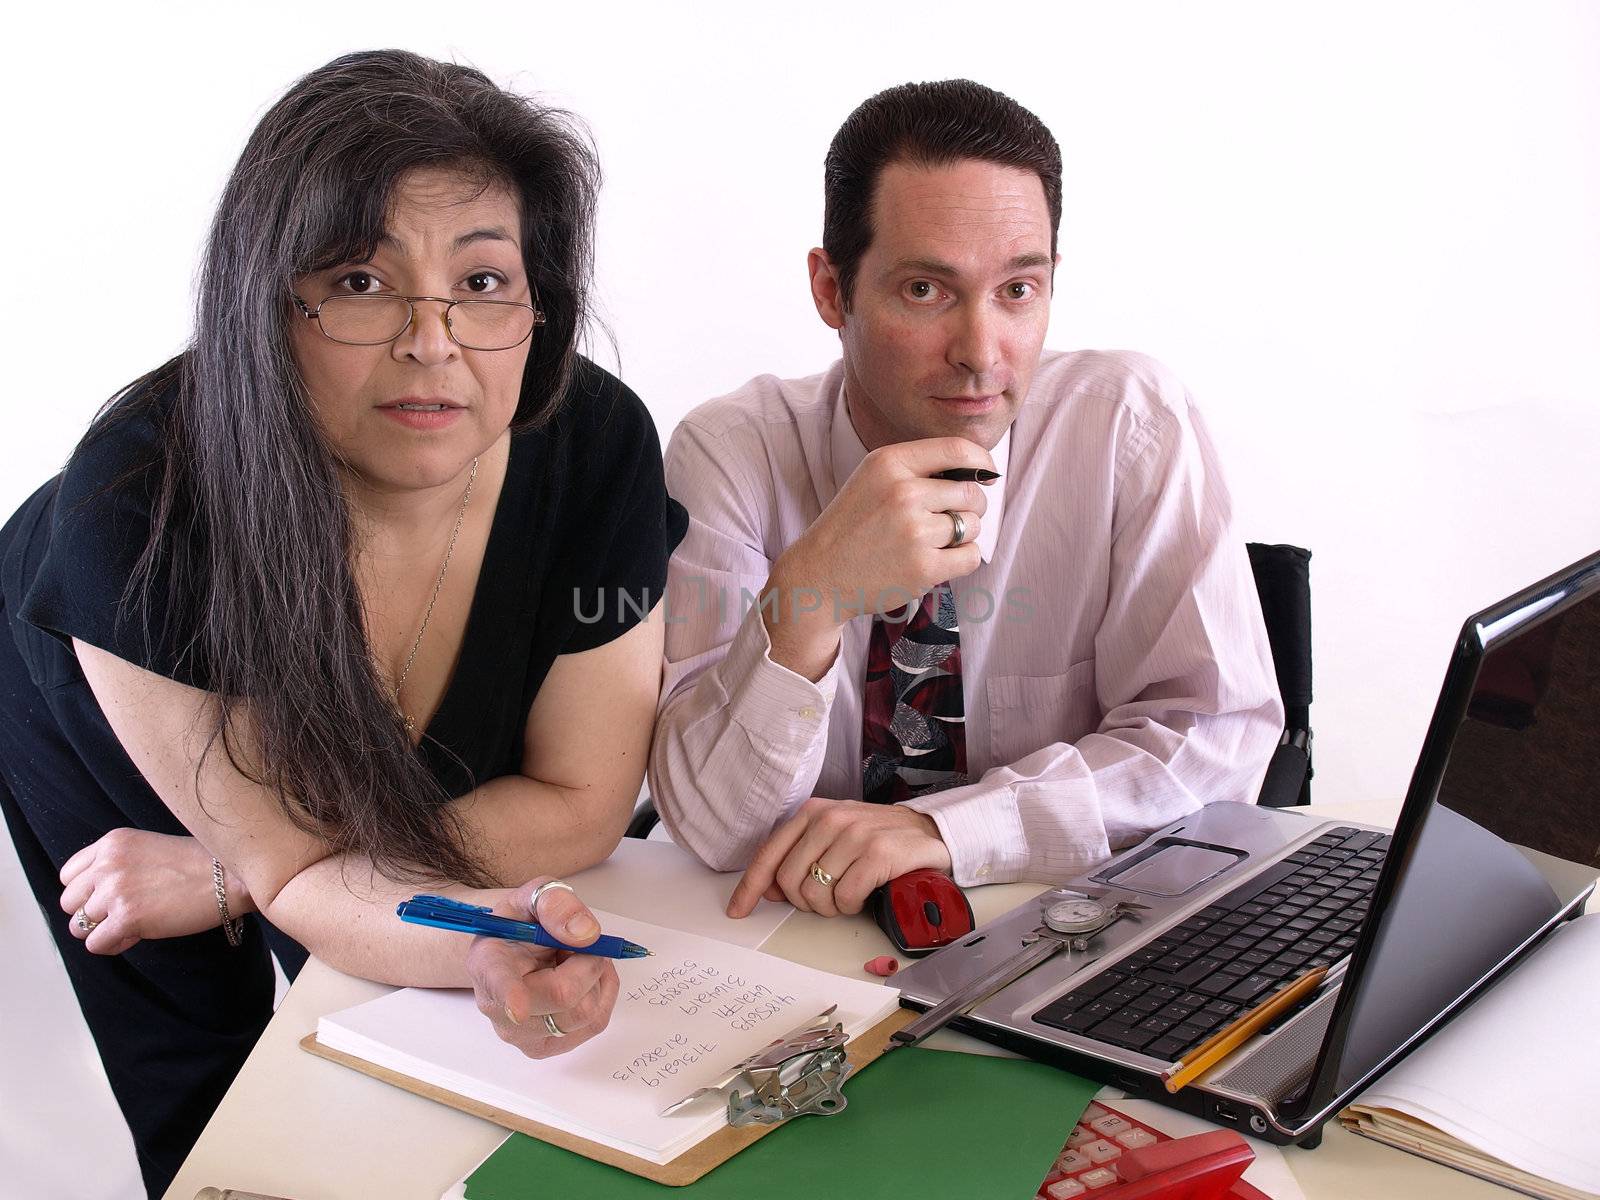 A male and female working together in the office at the computer. Isolated against a white background.